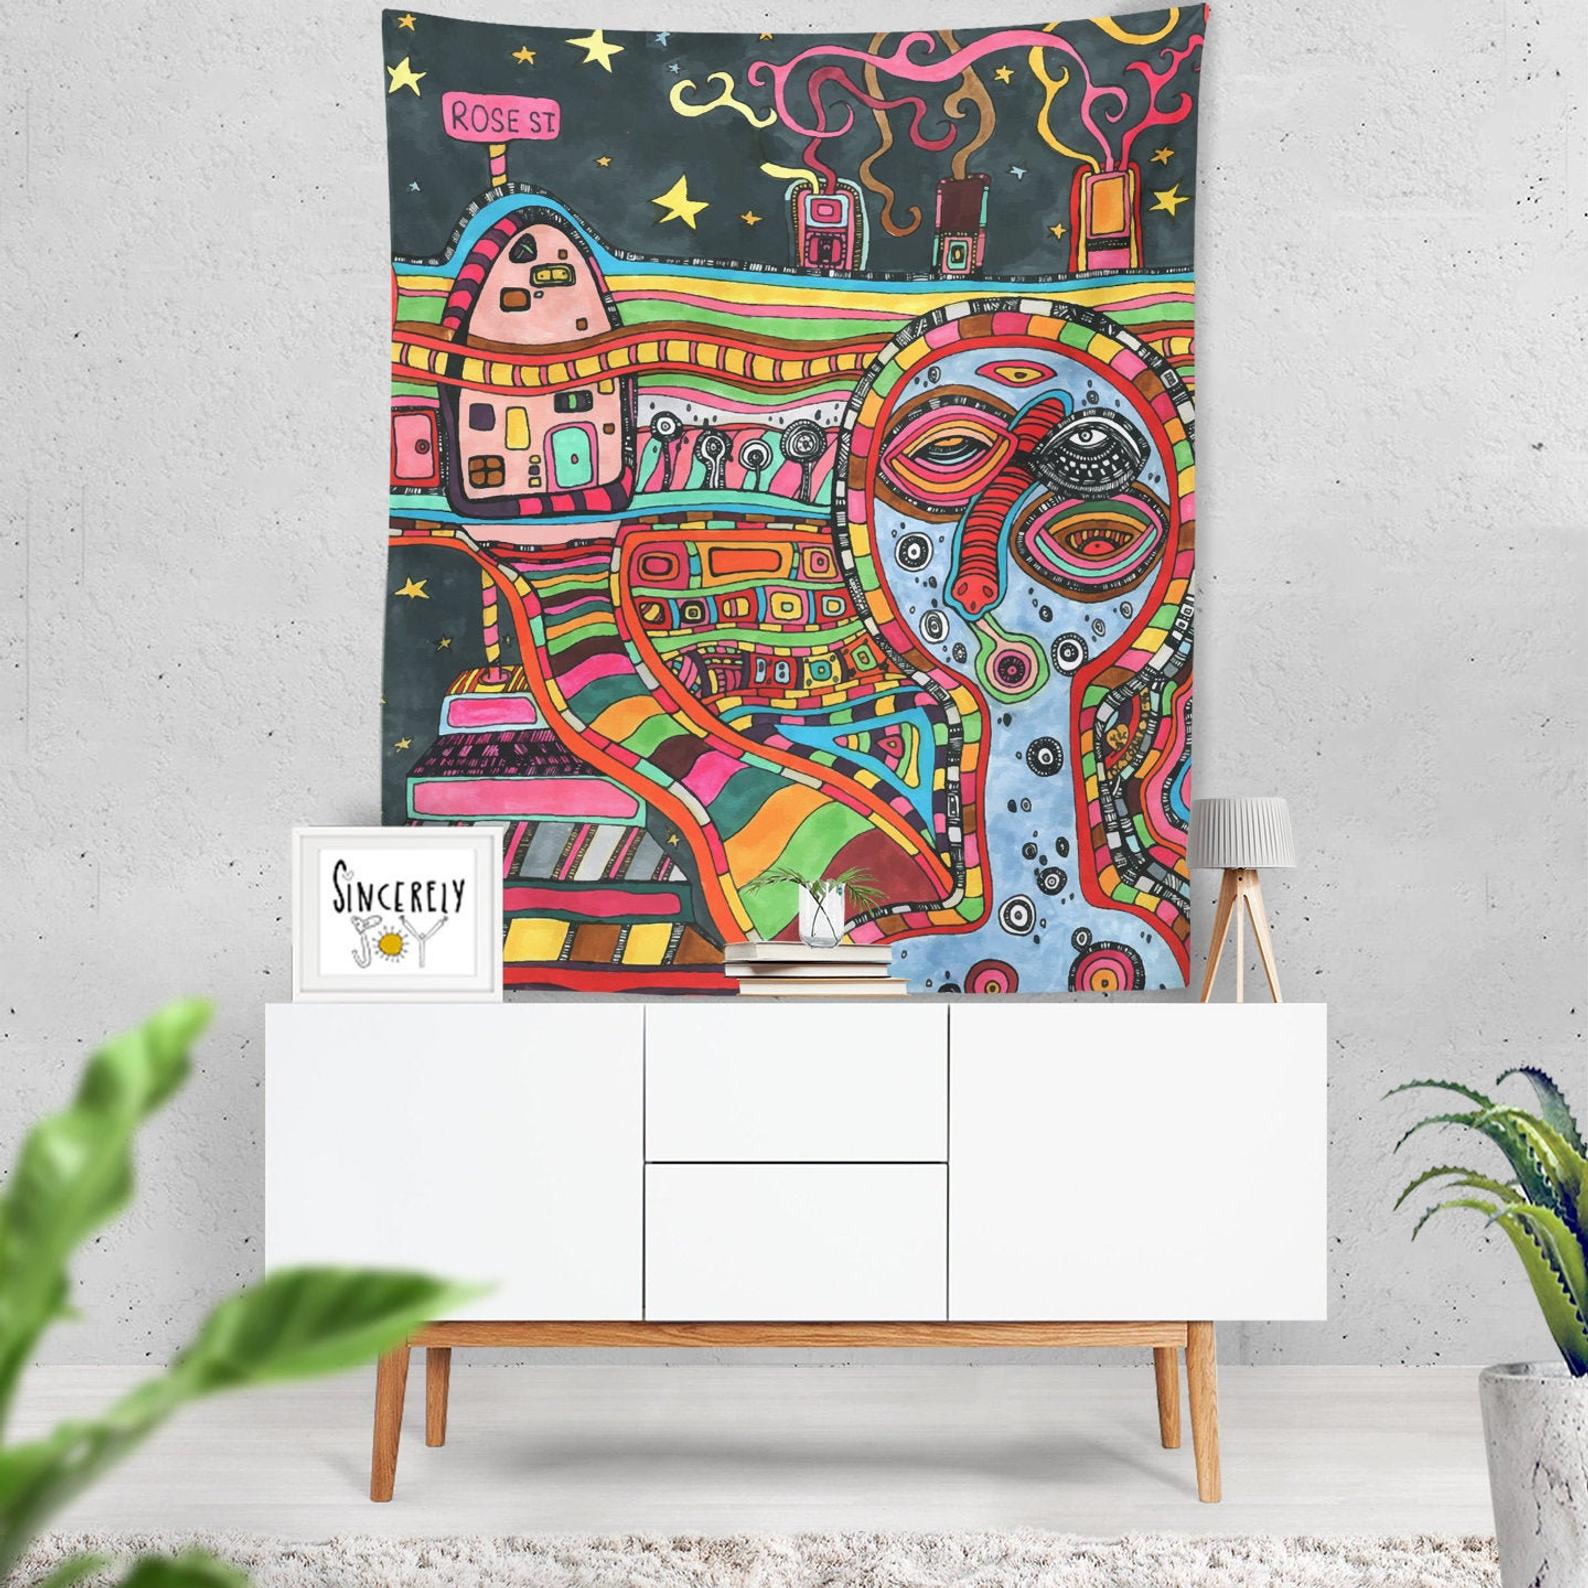 Wall Art Tapestry 'Rose St'